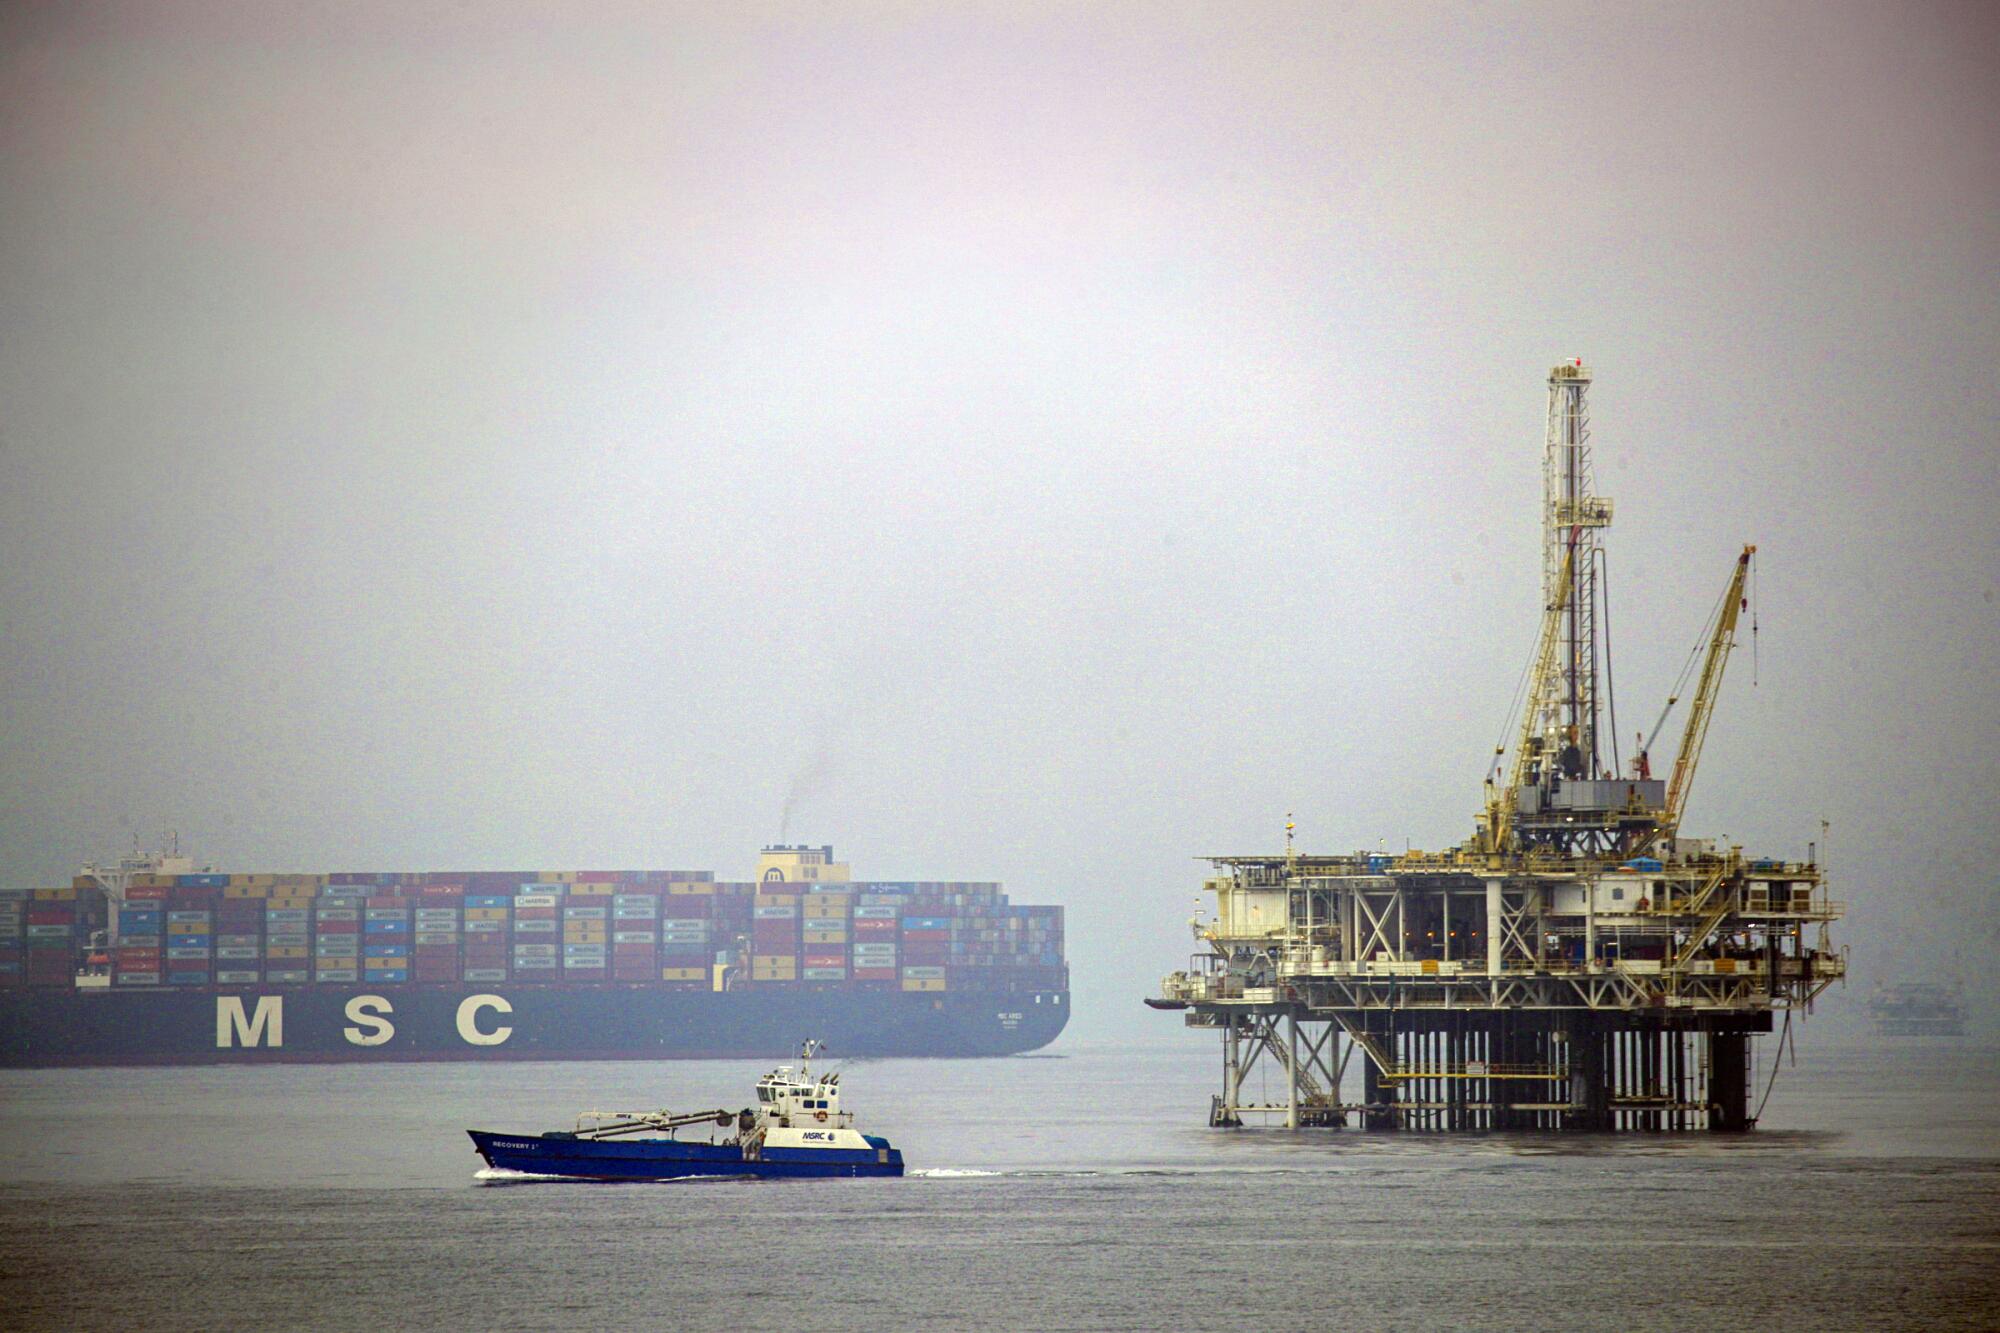 A cargo ship, an oil platform and a smaller boat on an overcast day.